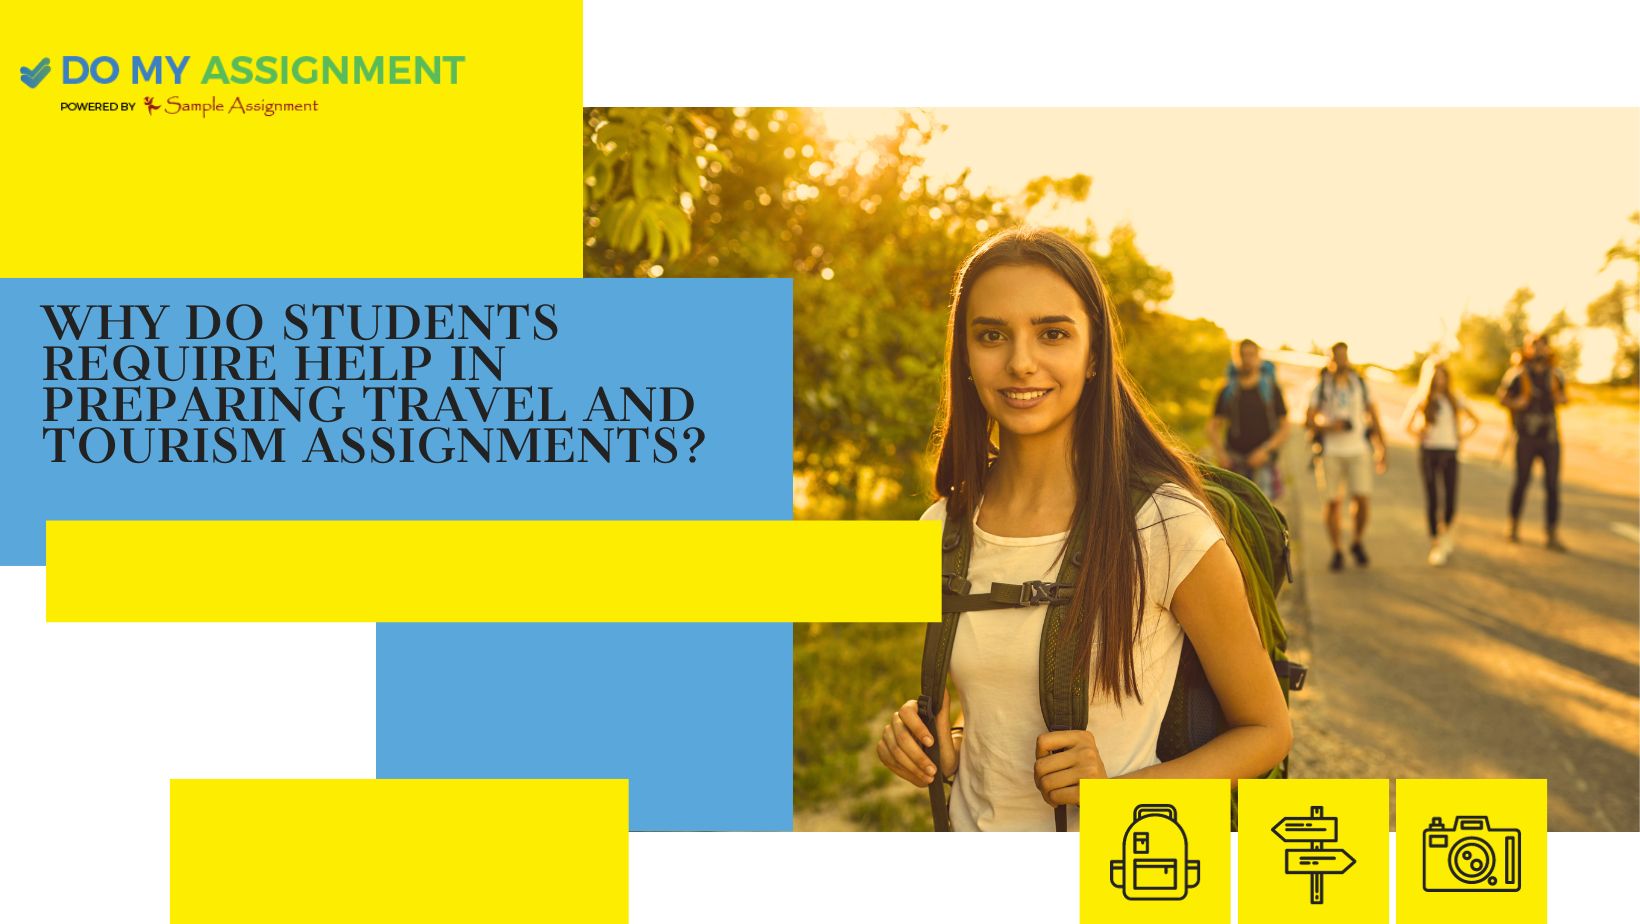 Challenges in Tourism Assignments: Student Support Needs